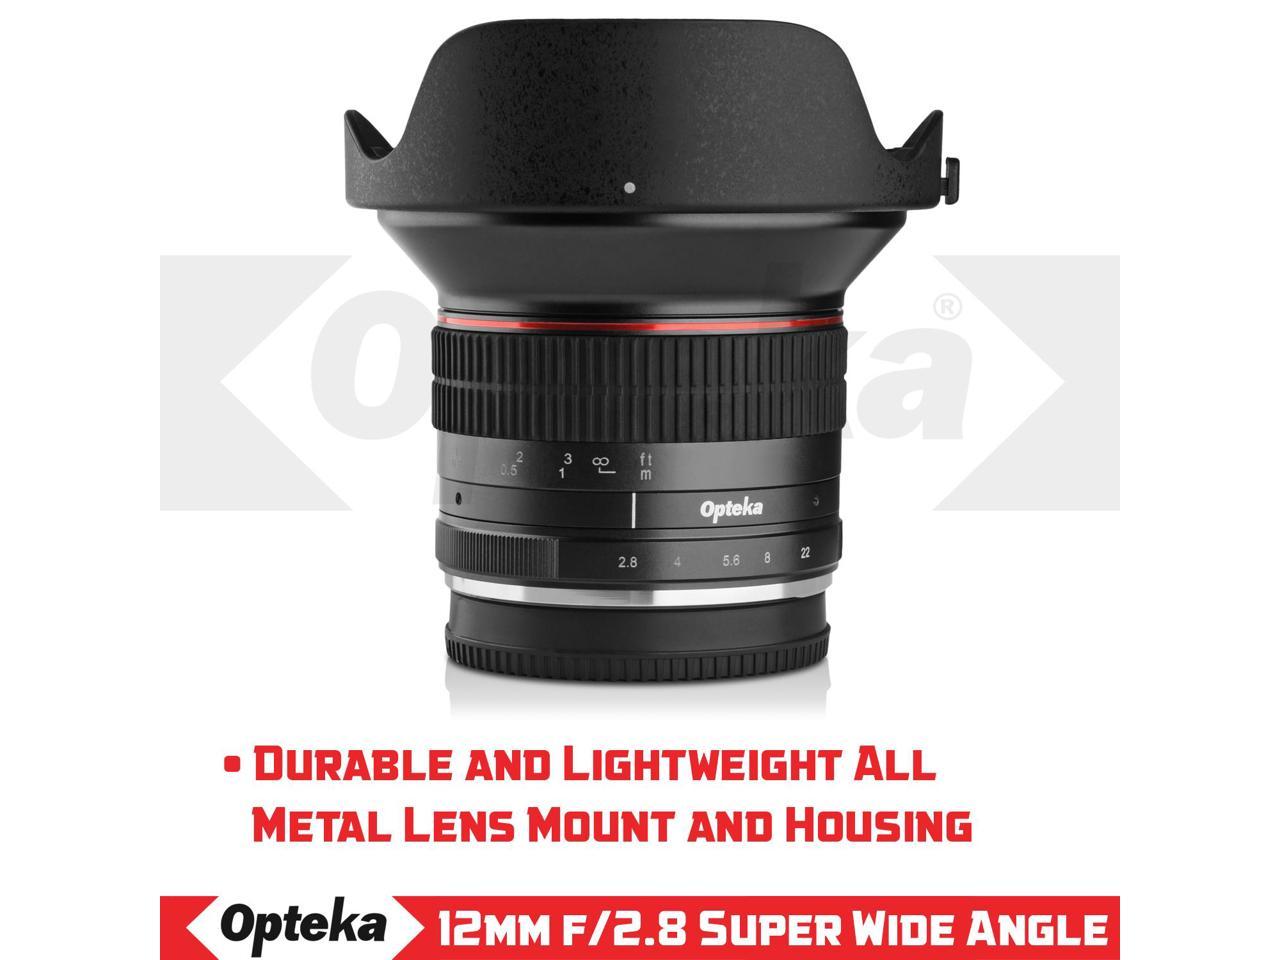 Opteka 12mm f/2.8 Manual Wide Angle Lens for Canon EF-M M100 M10 M6 M5 M3 M2 